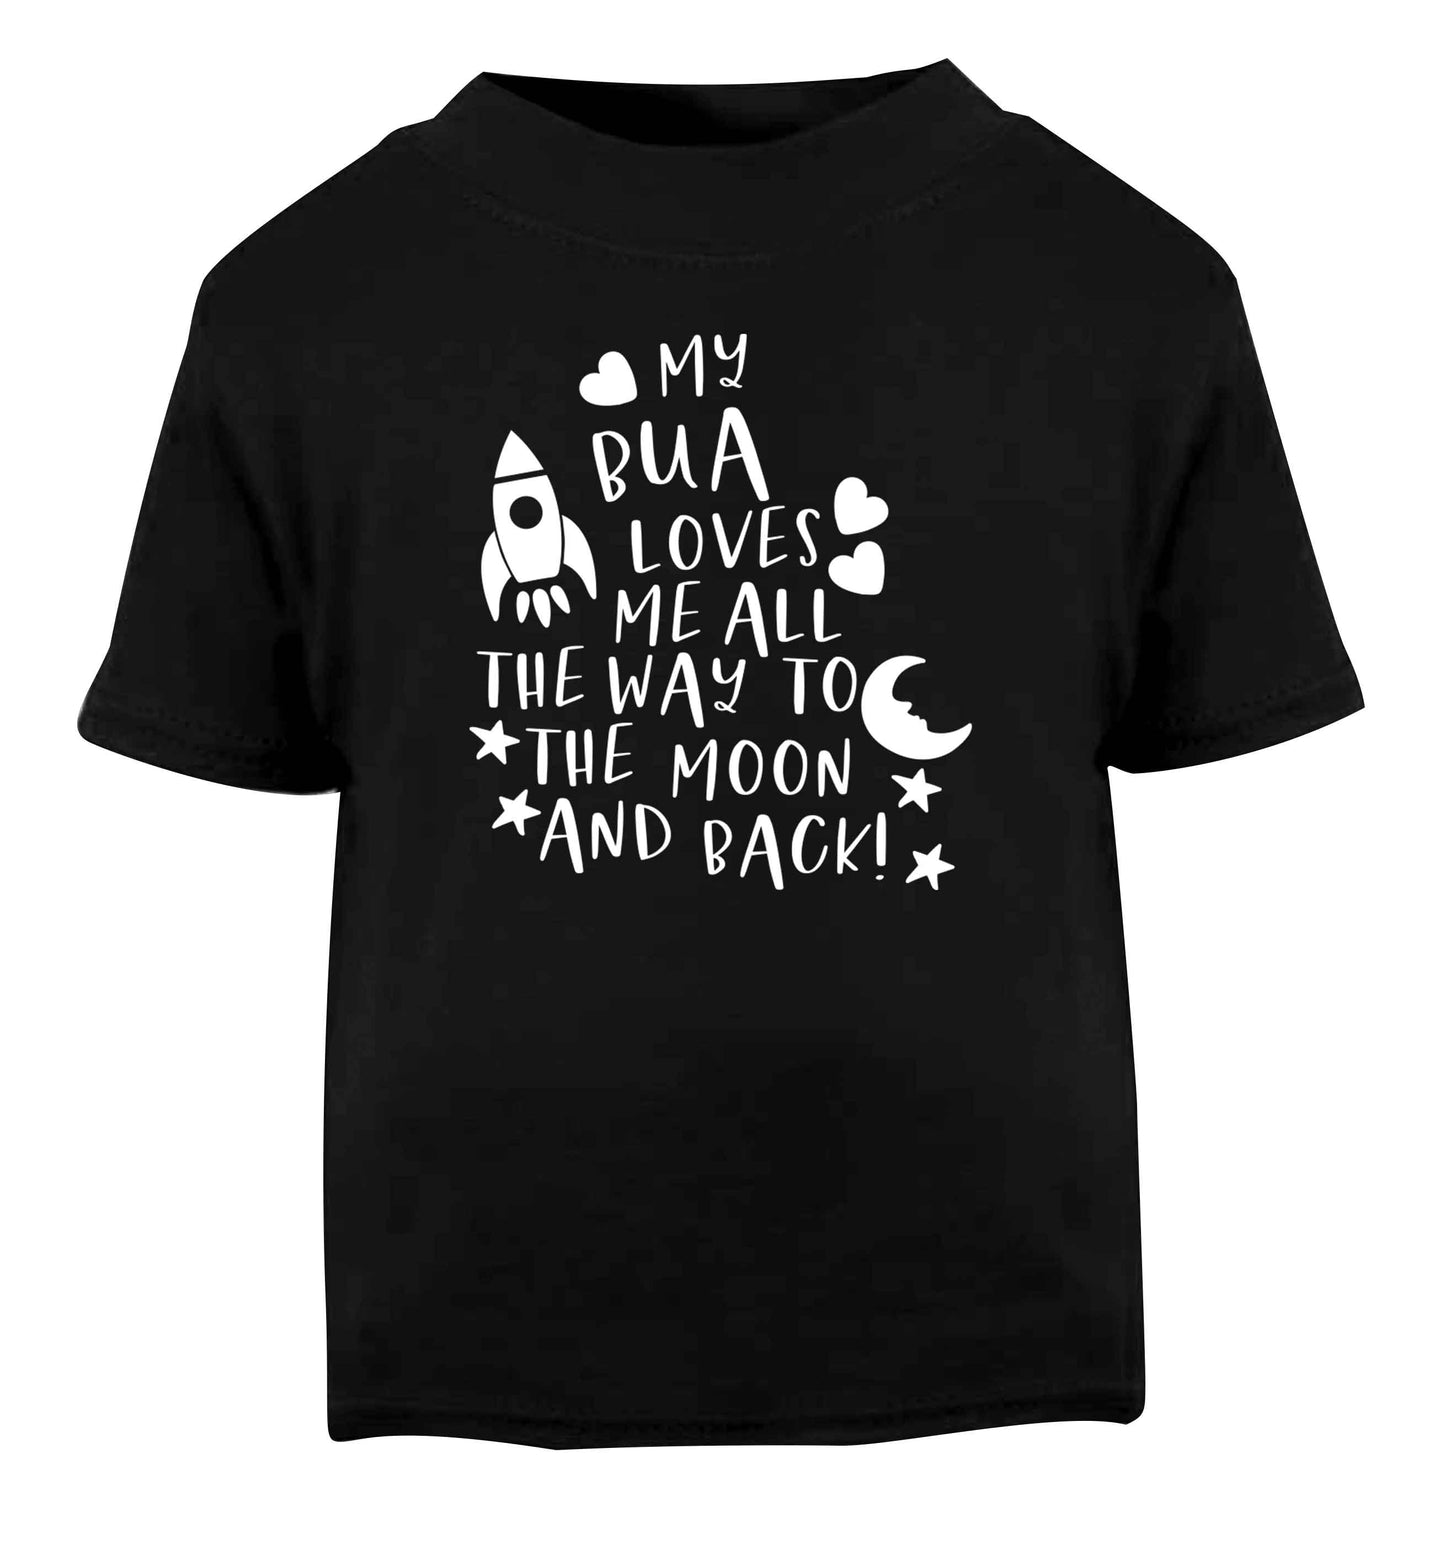 My bua loves me all they way to the moon and back Black Baby Toddler Tshirt 2 years